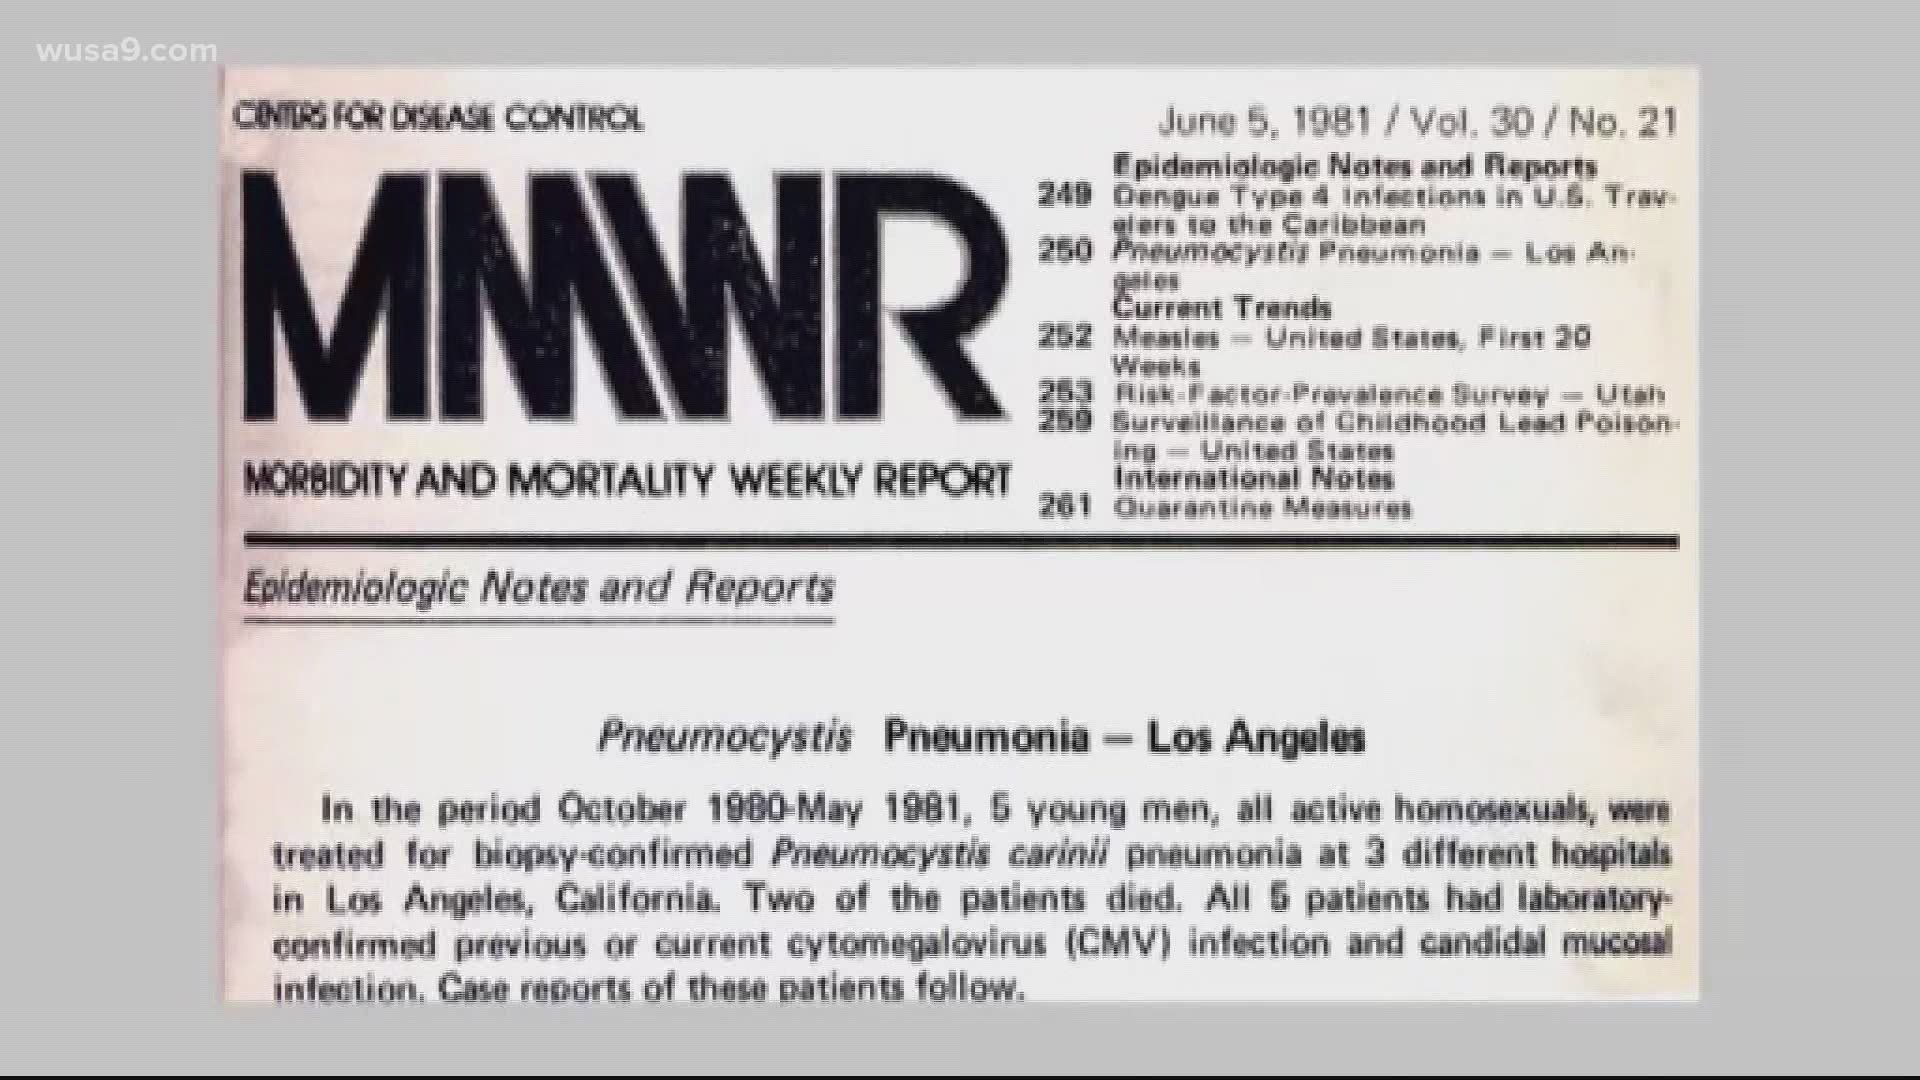 On June 5, 1981, the CDC reported about a mysterious illness in five gay men in its weekly Morbidity and Mortality Report.